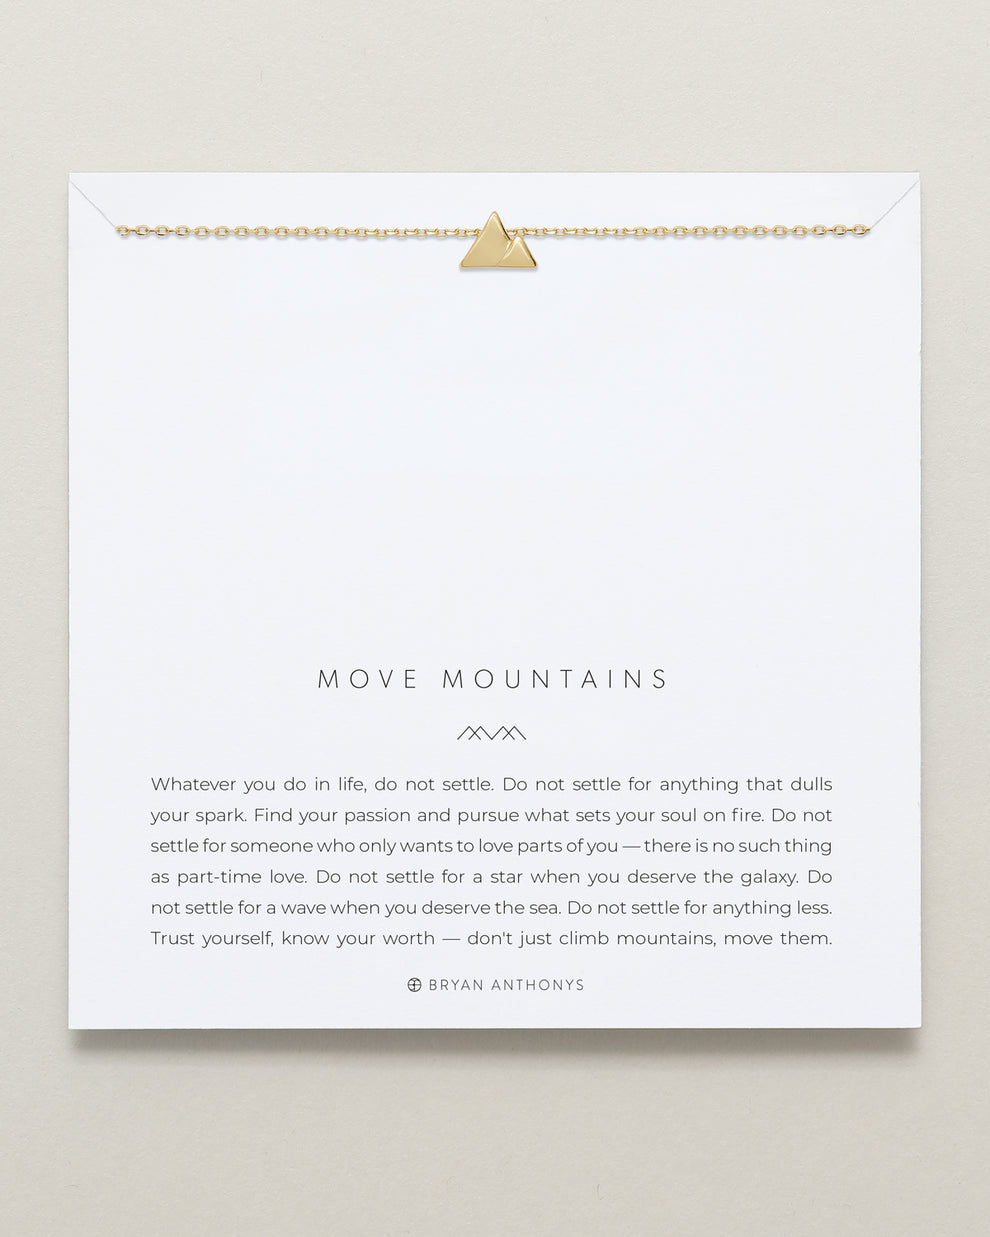 Bryan Anthonys "Move Mountains" Necklace-Gold